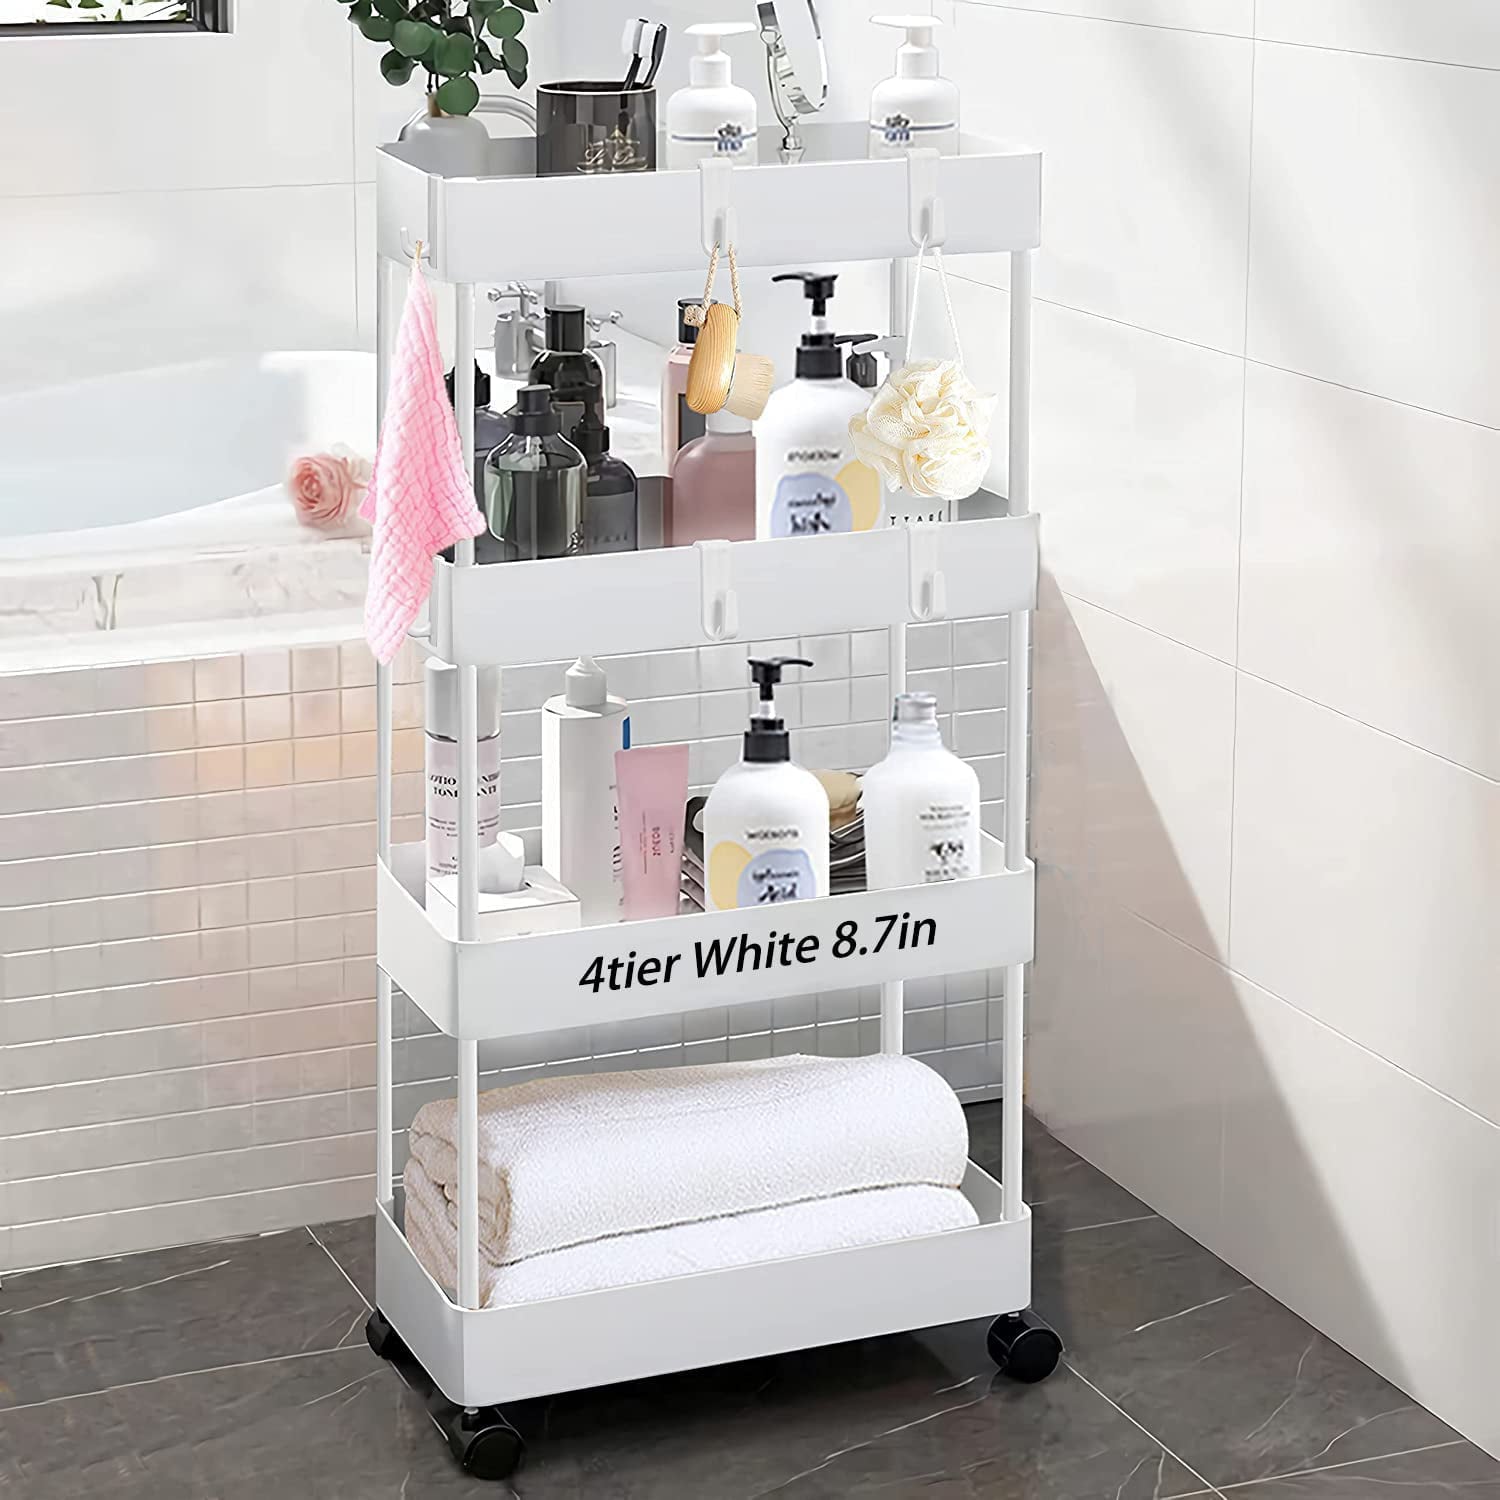 Rolling Cart， GAITON 4 Tiers Laundry Room Organizer and Storage Cart with Wheels， White